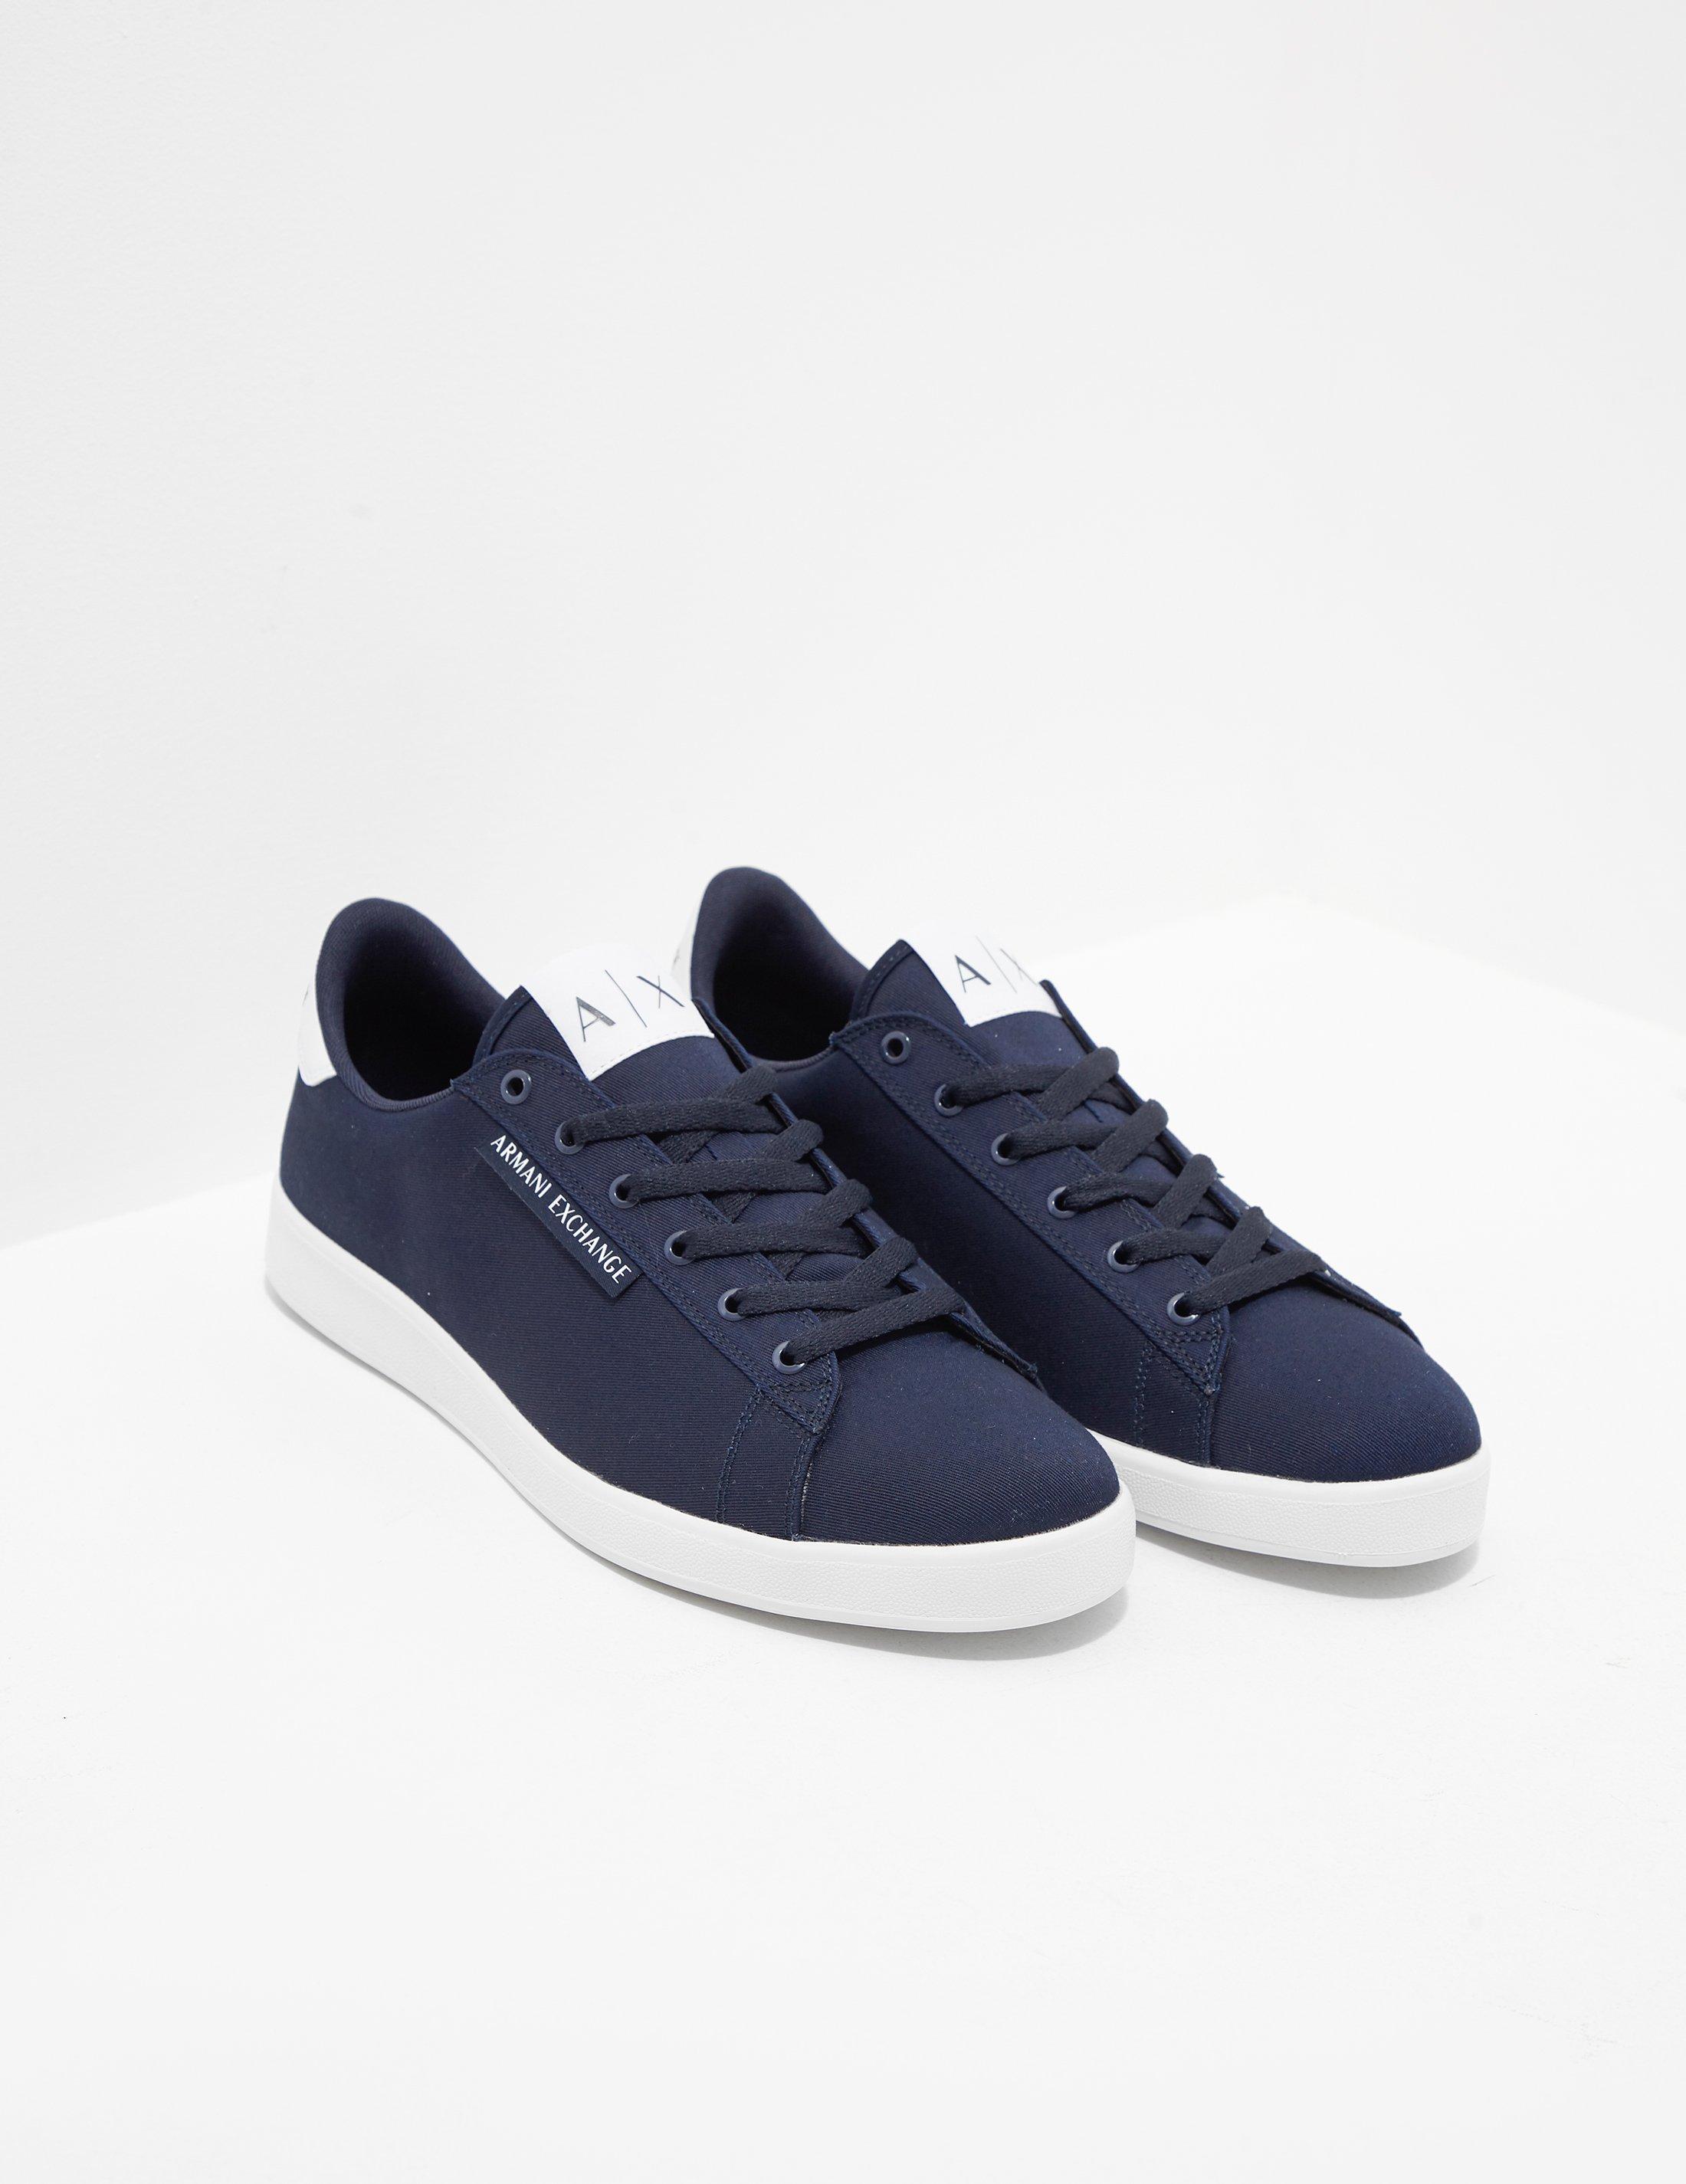 Armani Exchange Canvas Trainers - Online Exclusive Navy Blue for Men - Lyst